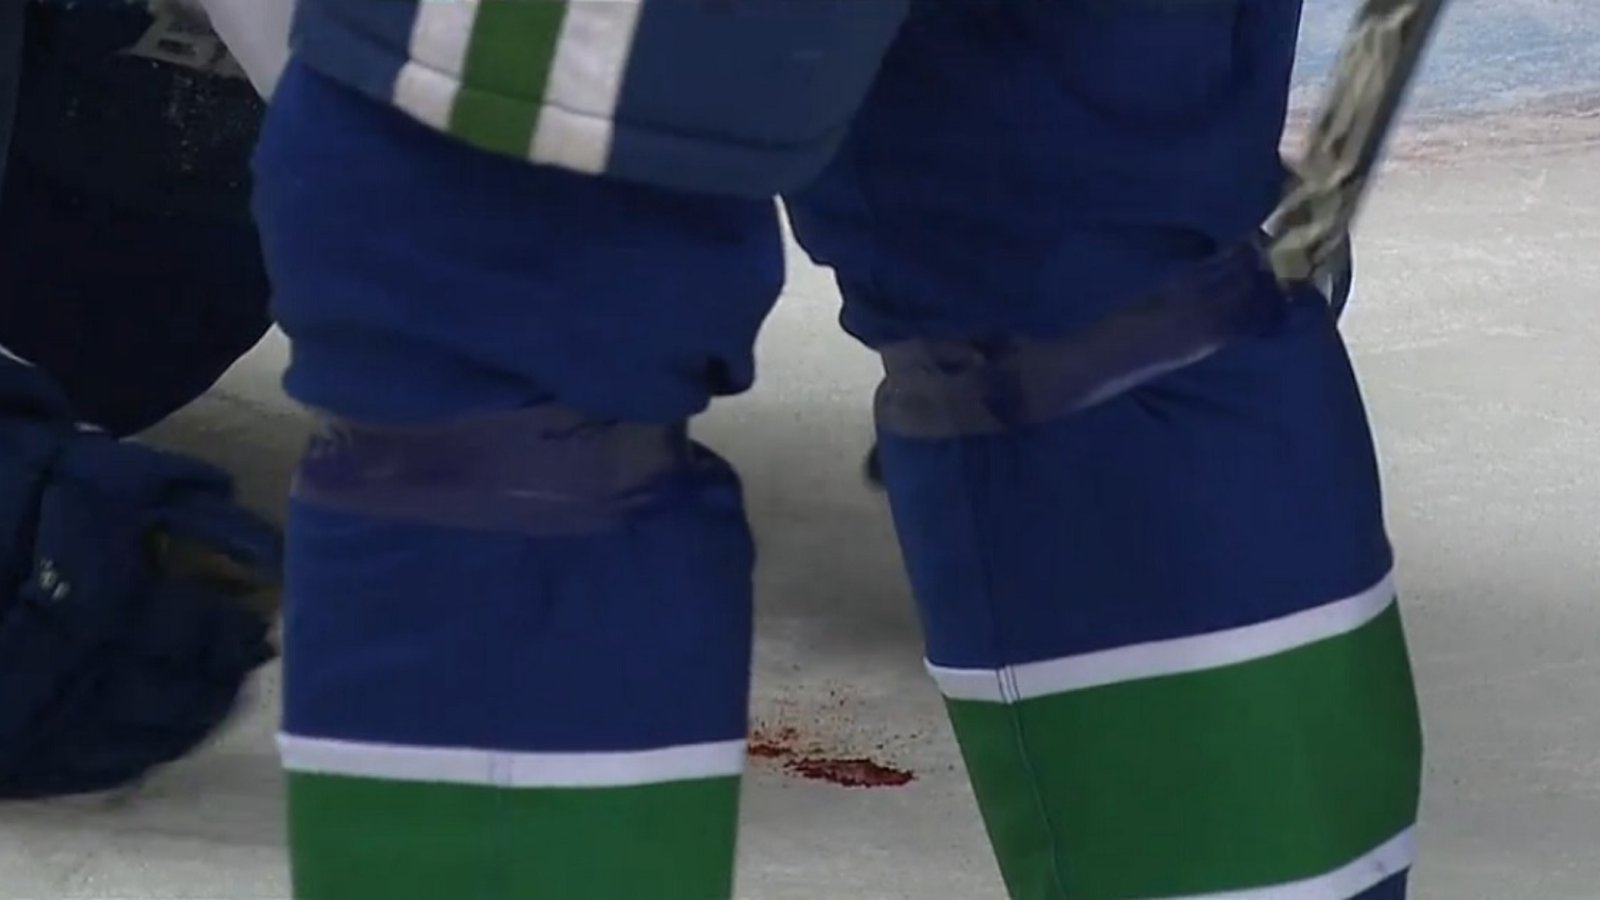 Defenseman leaves a bloody mess on the ice after taking a shot to the face.